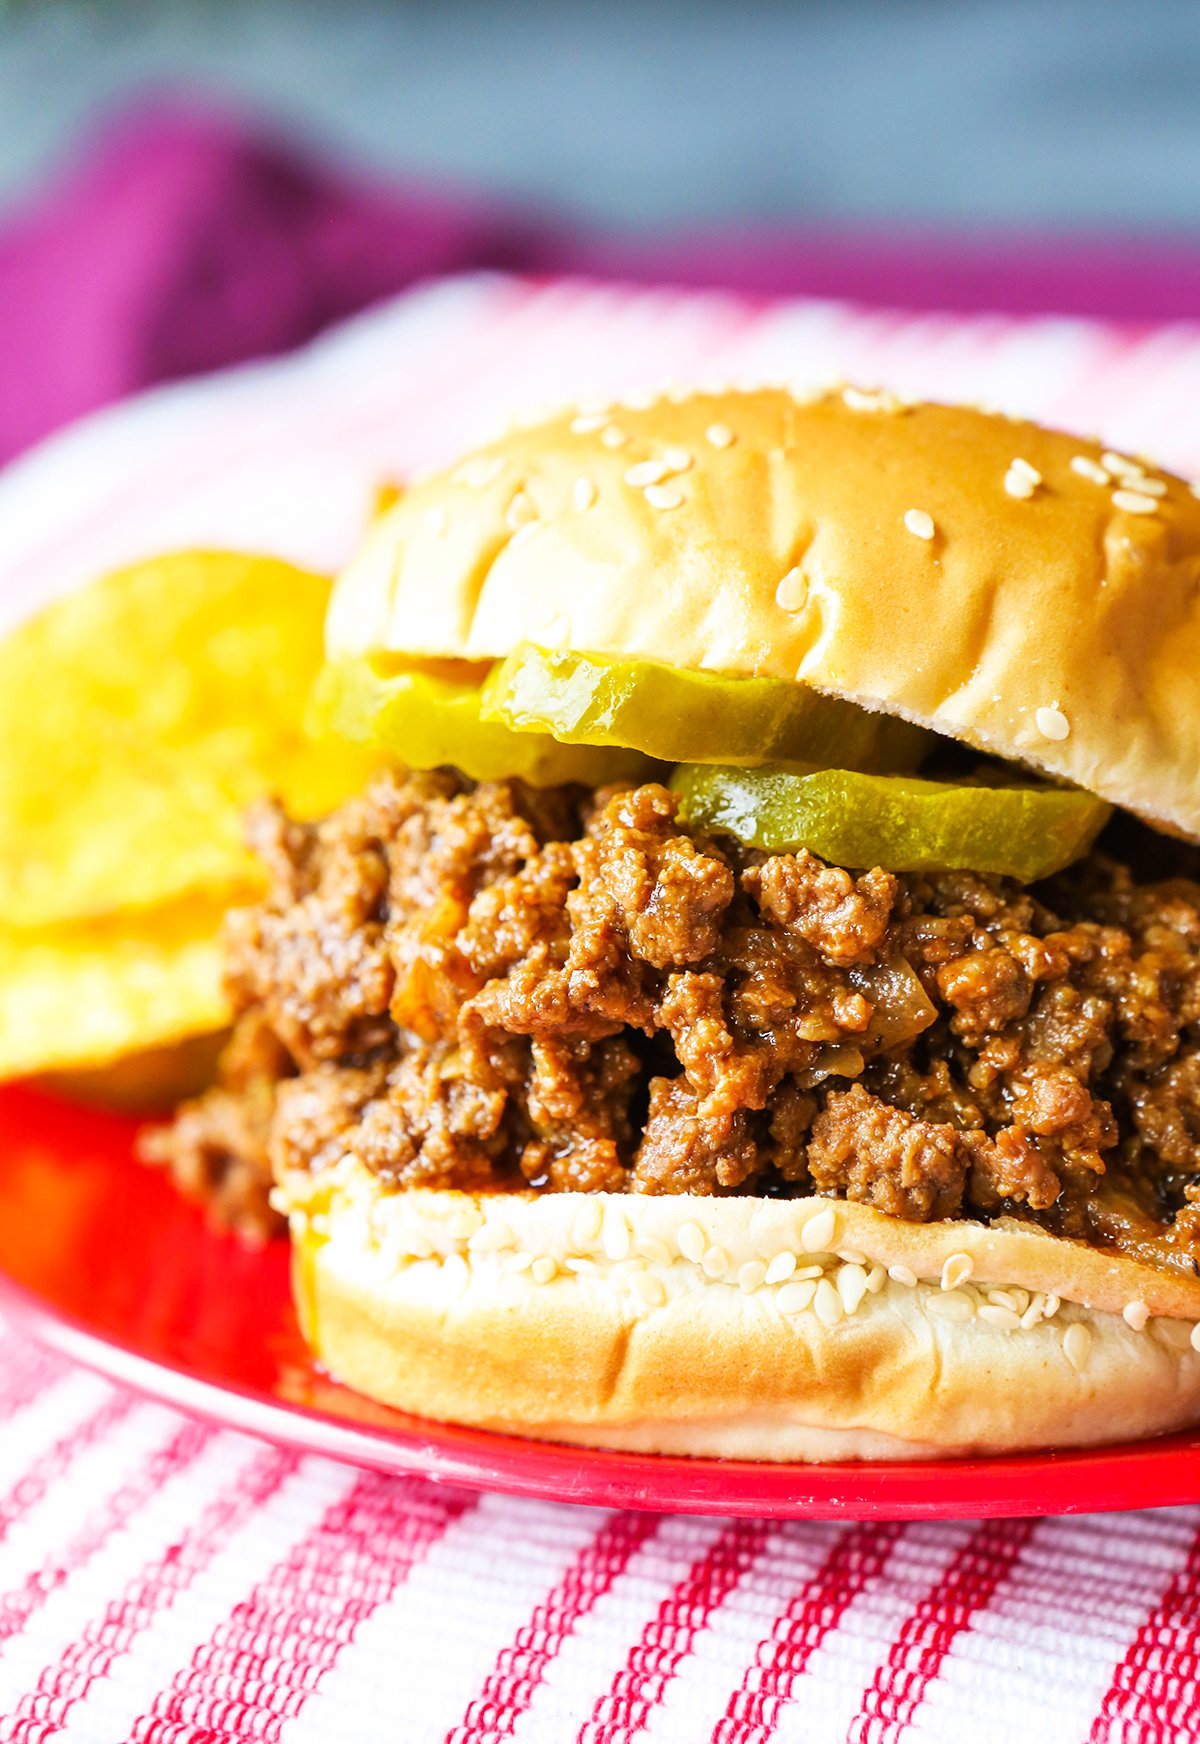 Close up of a loaded sloppy  joe sandwich in a bun, on a red plate.